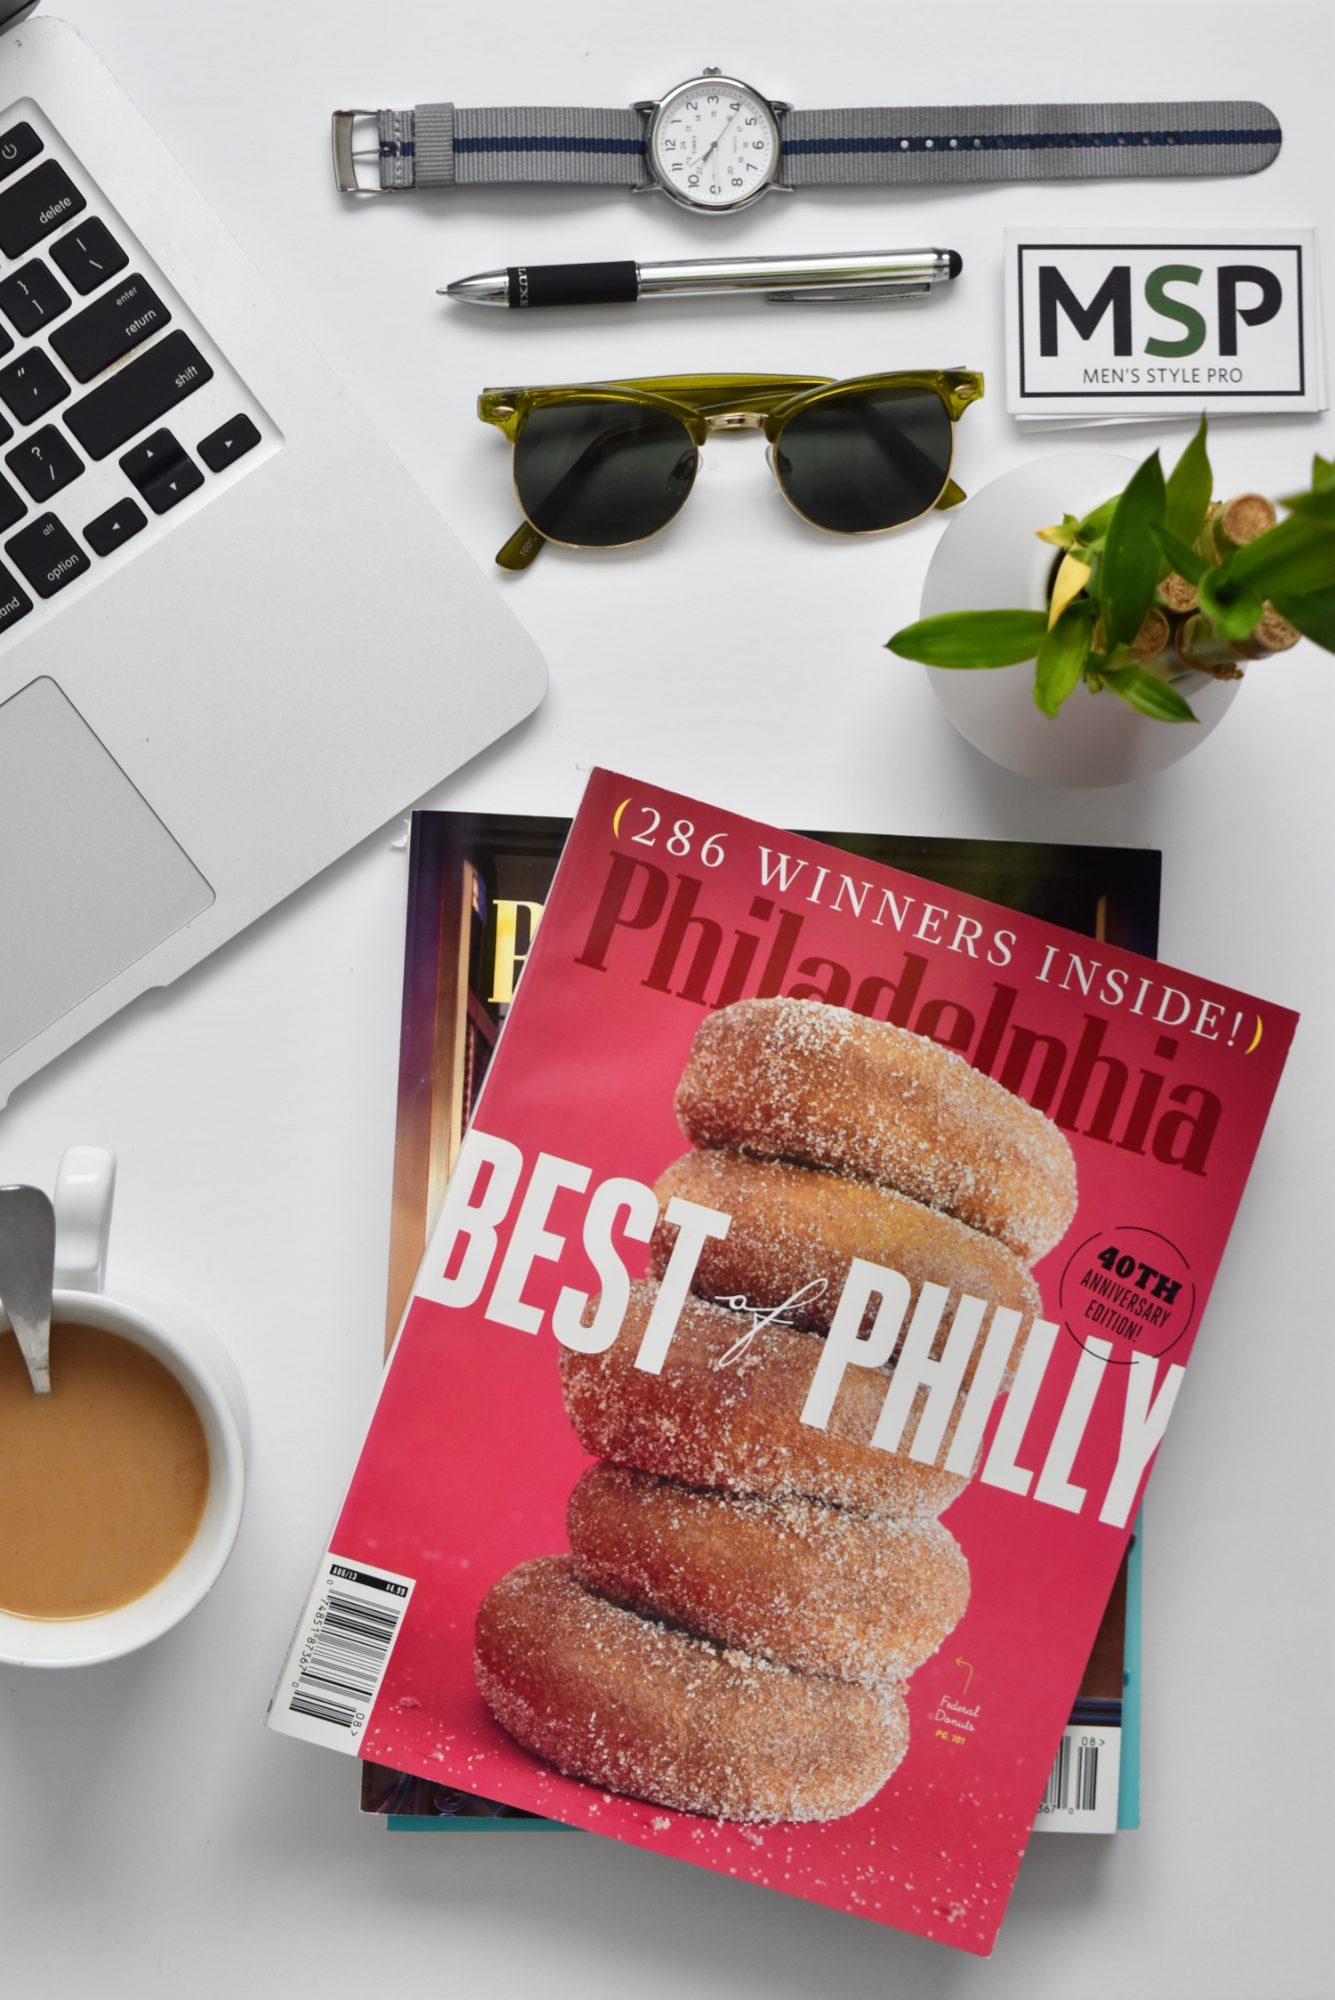 Philly Mag's Best of Philly x Men's Style Pro Discount Code